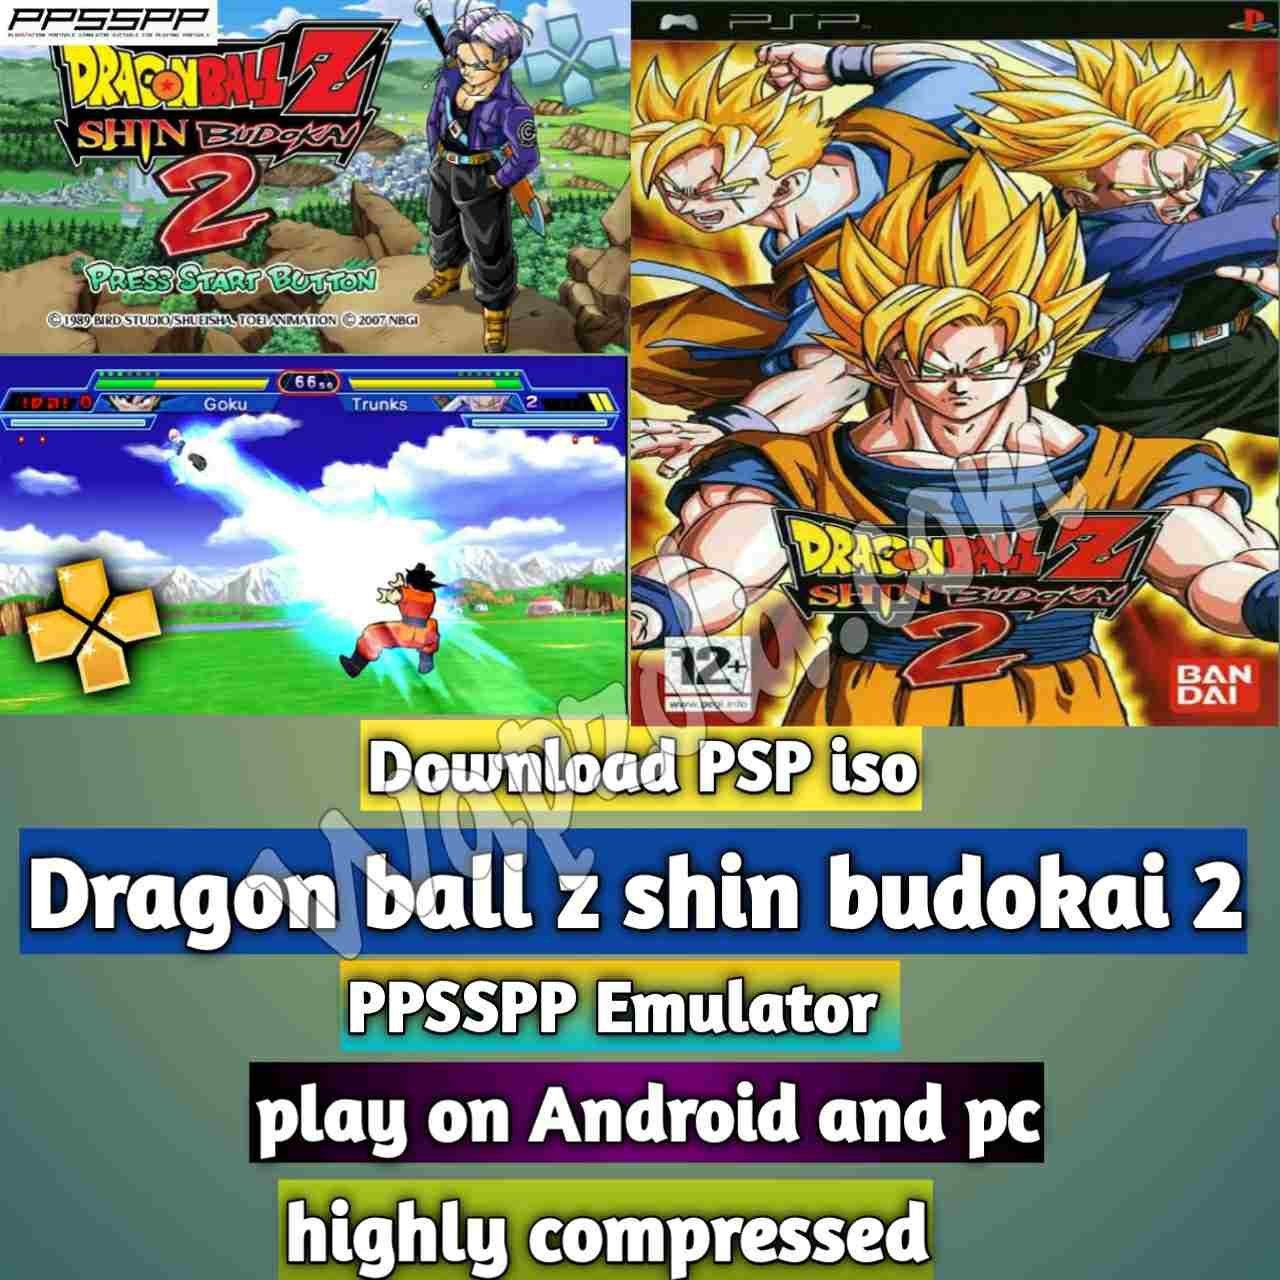 You are currently viewing [Download] Dragon ball z shin budokai 2 iso ppsspp emulator – PSP APK Iso ROM highly compressed 300MB